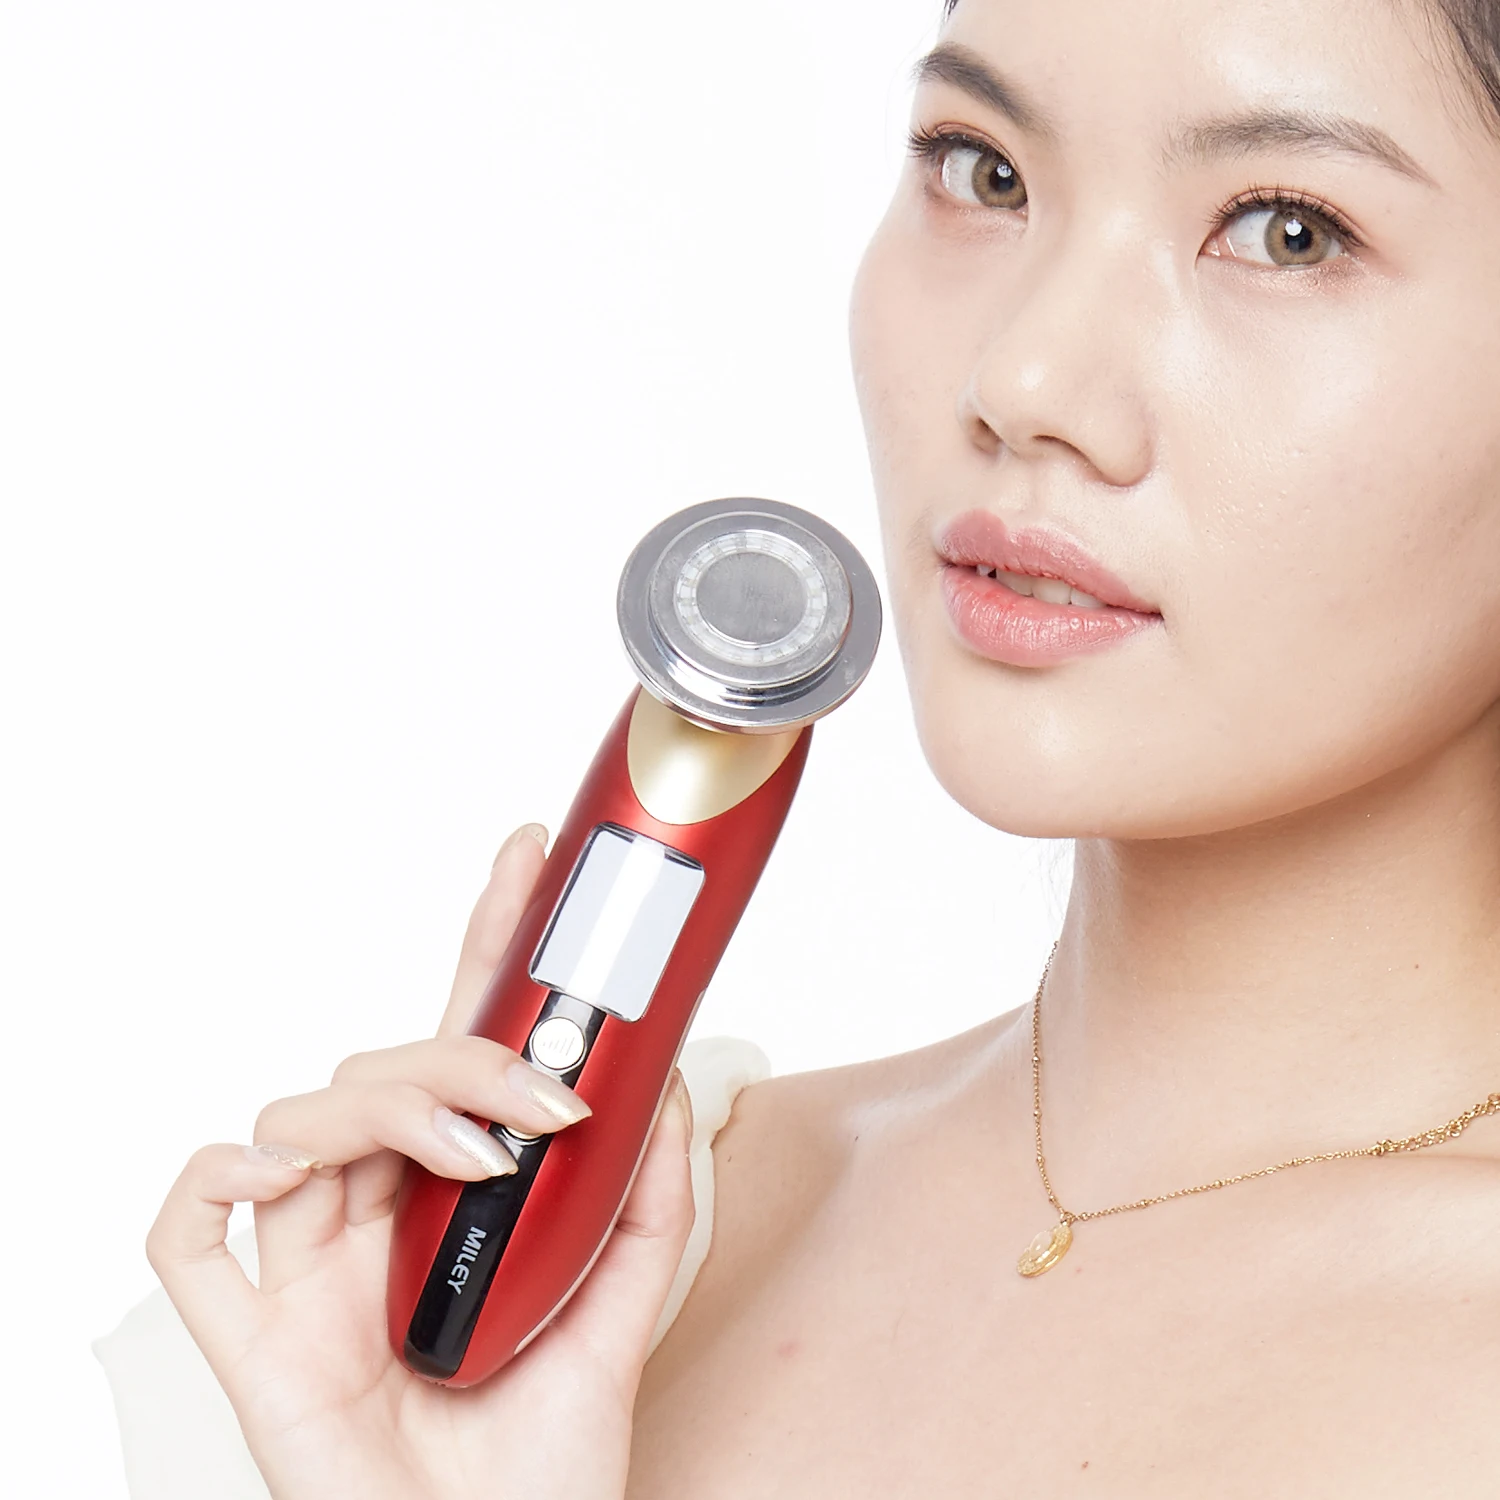 New Appearance Beauty Instrument Import Instrument Export Clean Electronic Beauty Instrument Taut Photon Skin Rejuvenation Instr export type electronic tube 2a3c generation 2a3